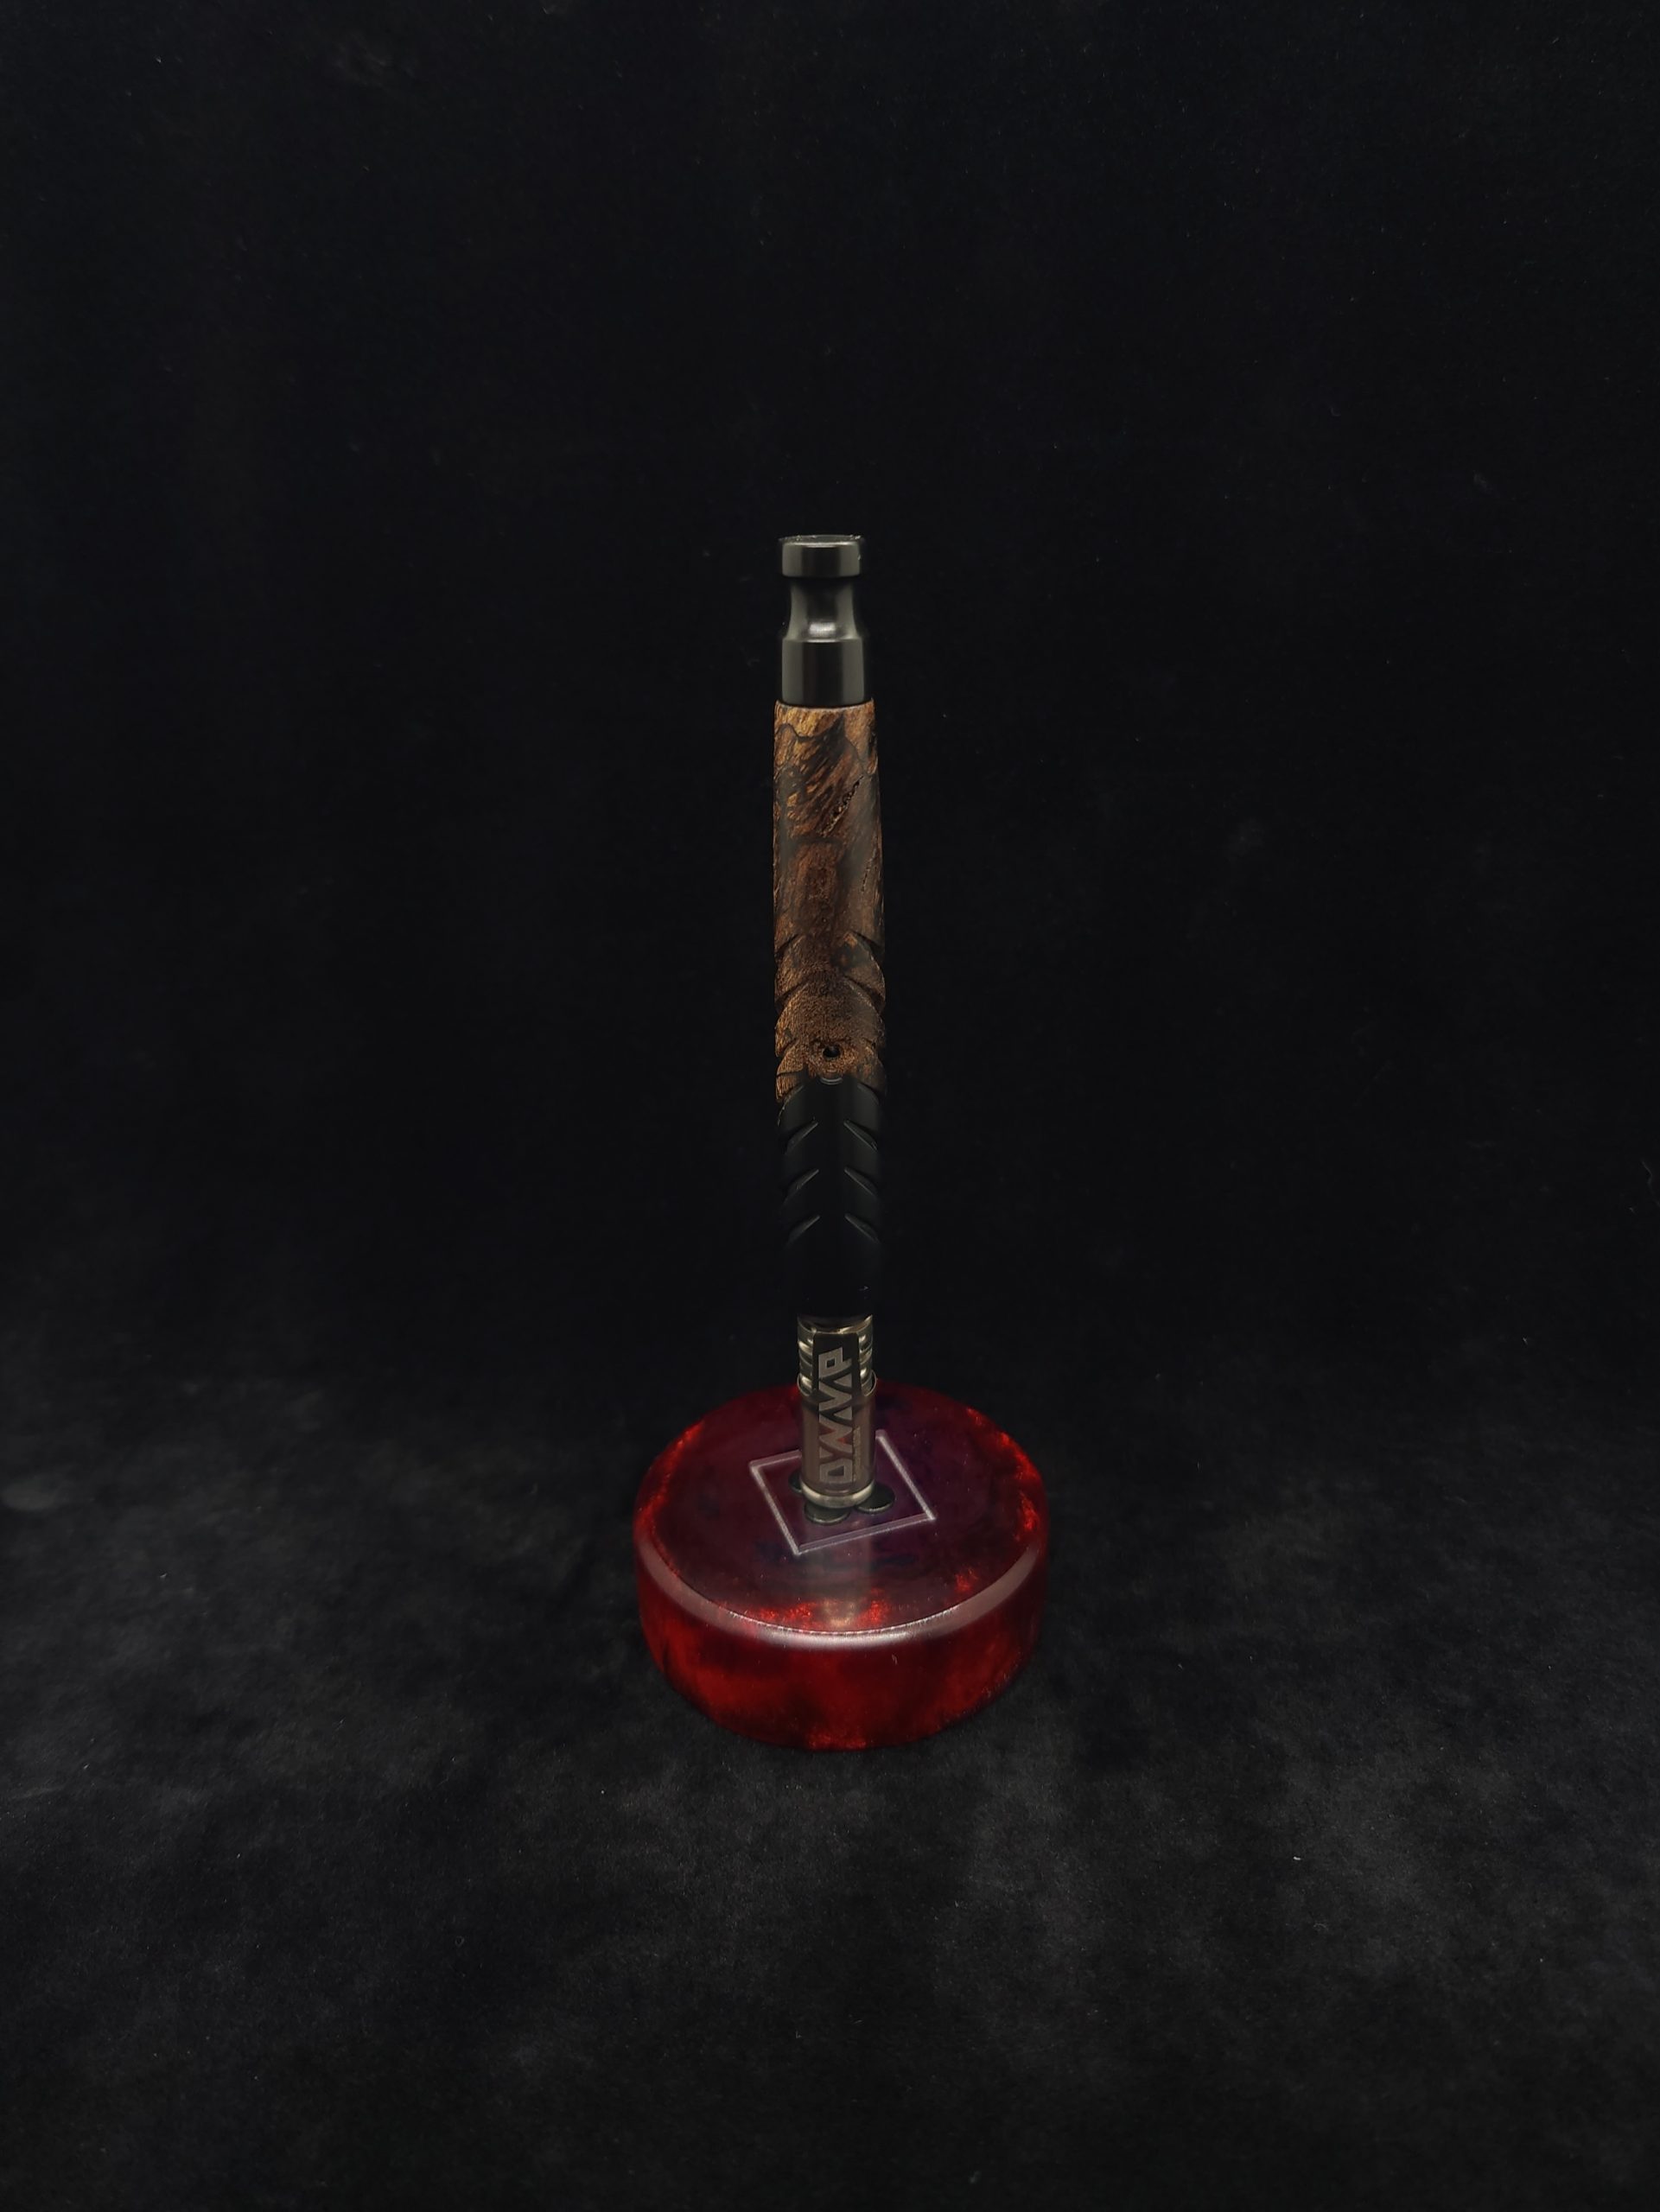 This image portrays Reaper XL Dynavap Stem/Burl Wood Hybrid+Black Matching Mouthpiece by Dovetail Woodwork.